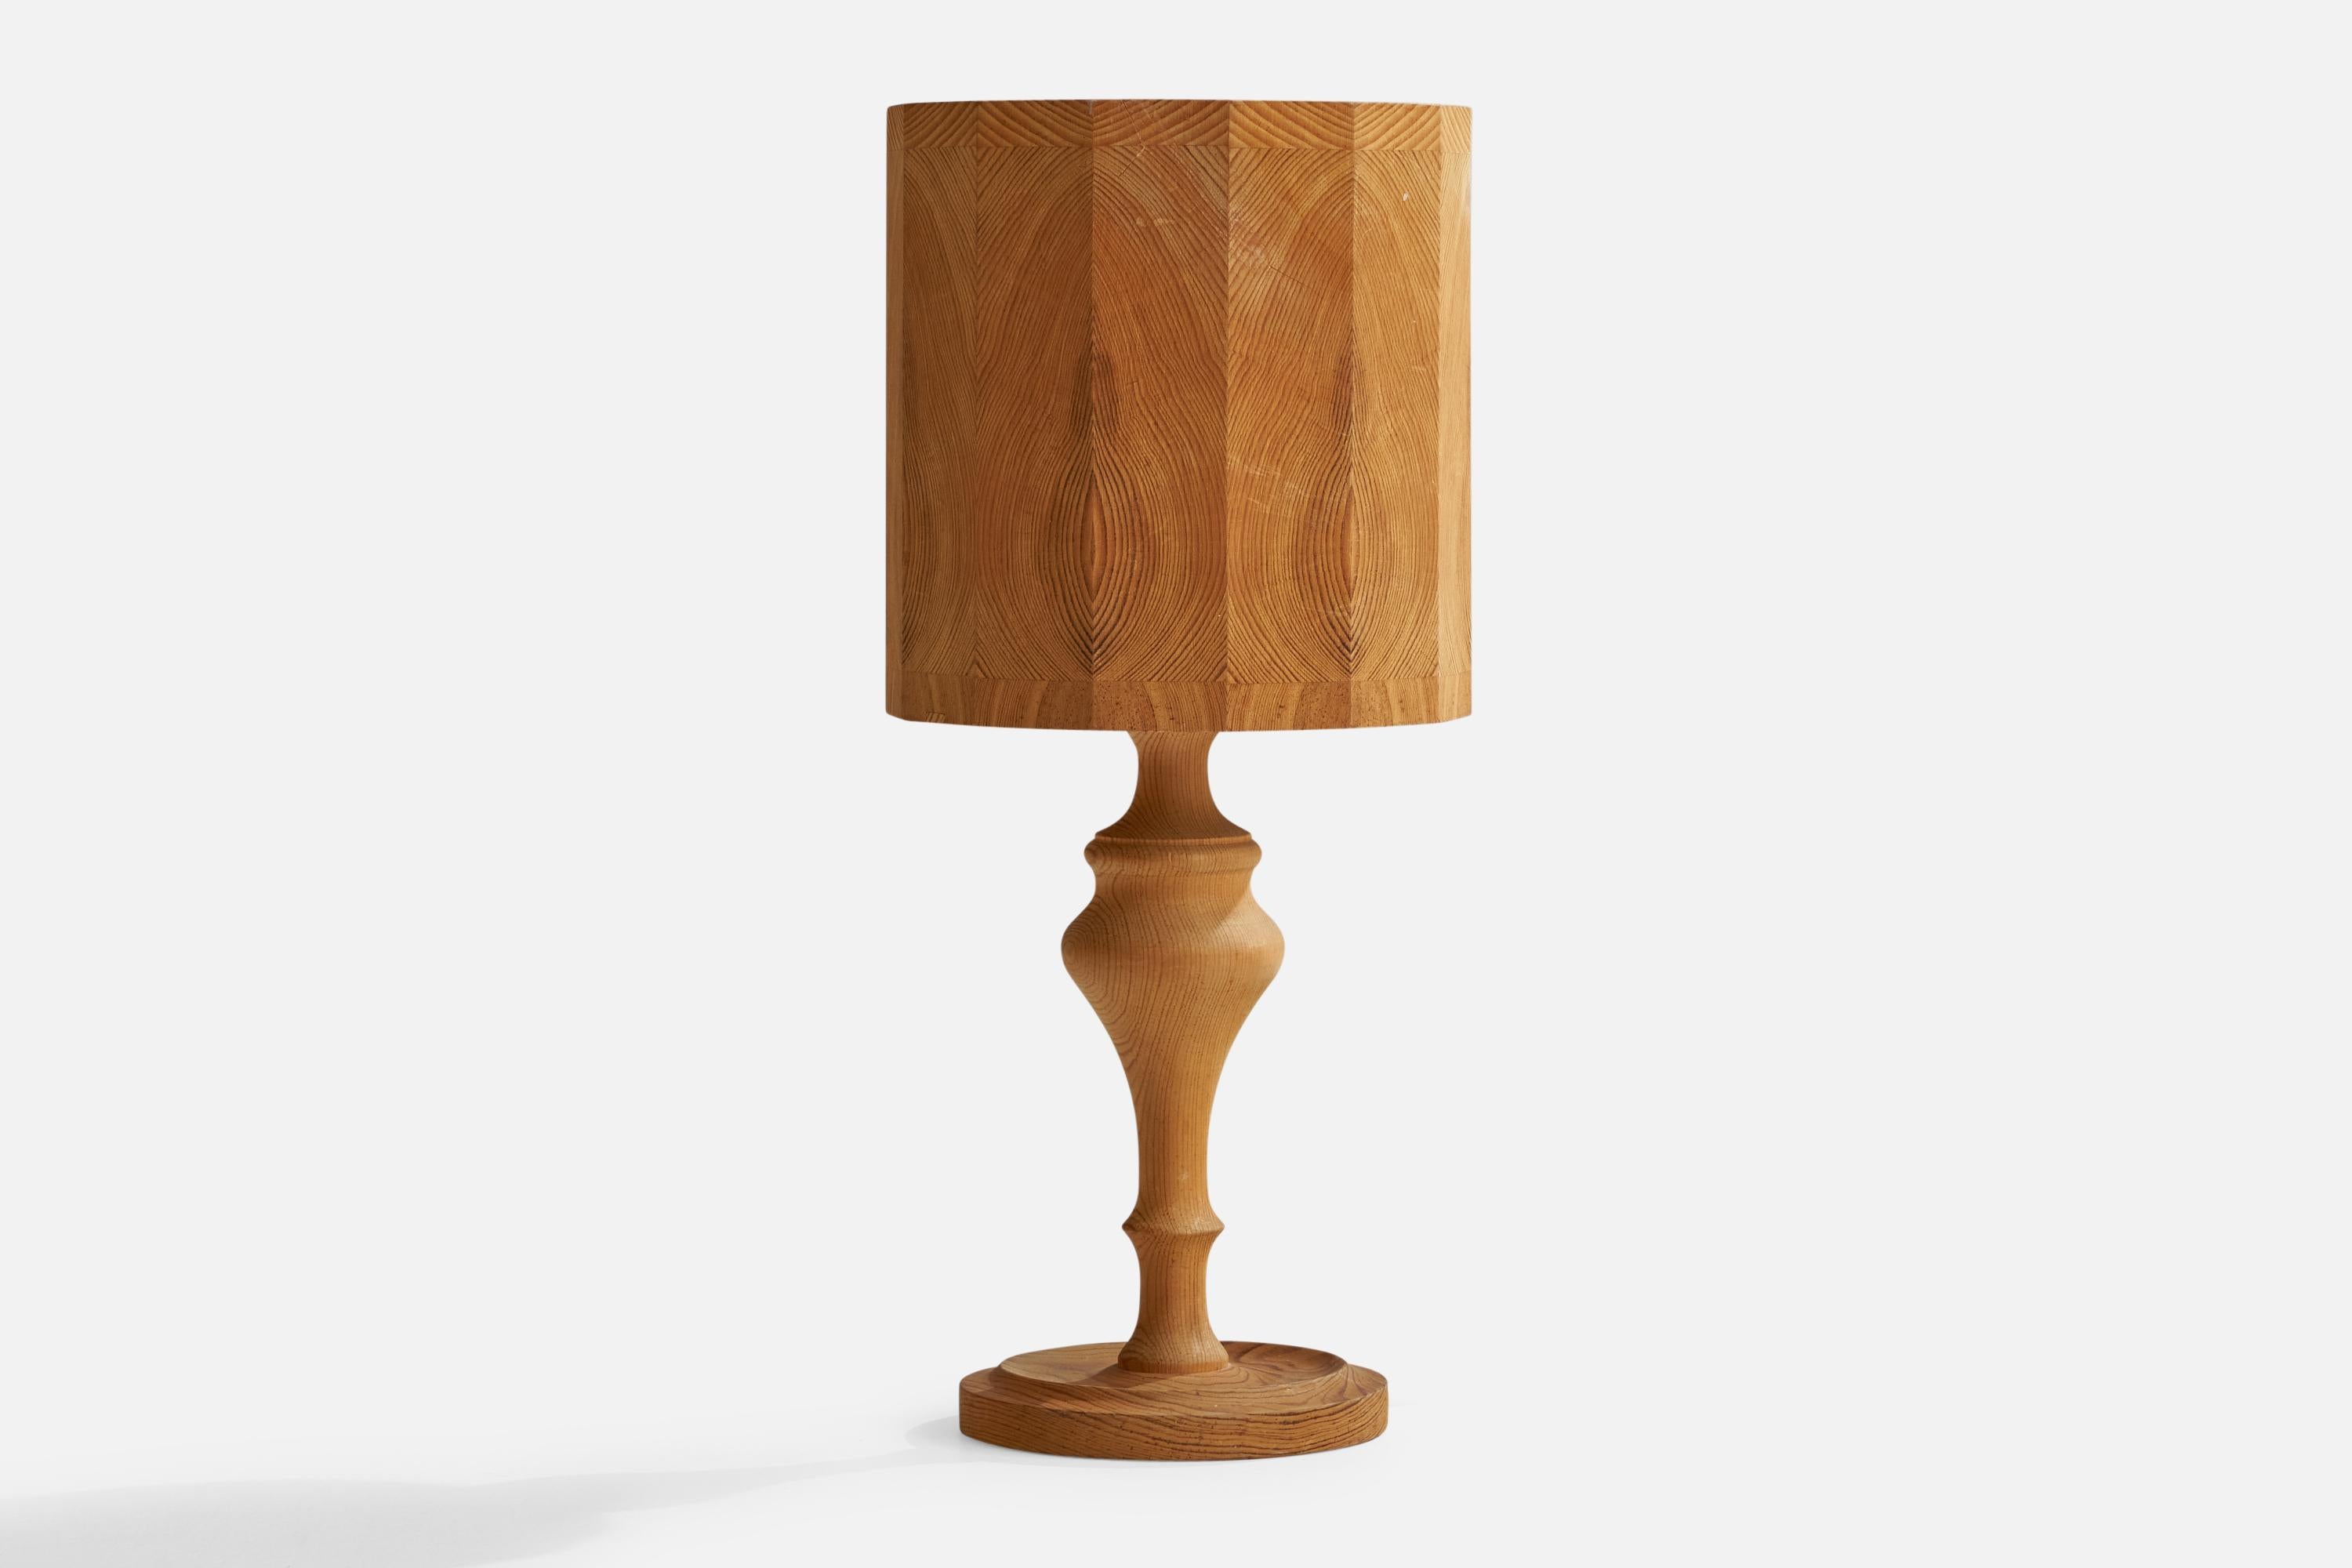 A pine table lamp designed and produced in Sweden, 1970s.

Overall Dimensions (inches): 16”  H x 6.75” W x 5”  D
Stated dimensions include shade.
Bulb Specifications: E-26 Bulb
Number of Sockets: 1
All lighting will be converted for US usage. We is